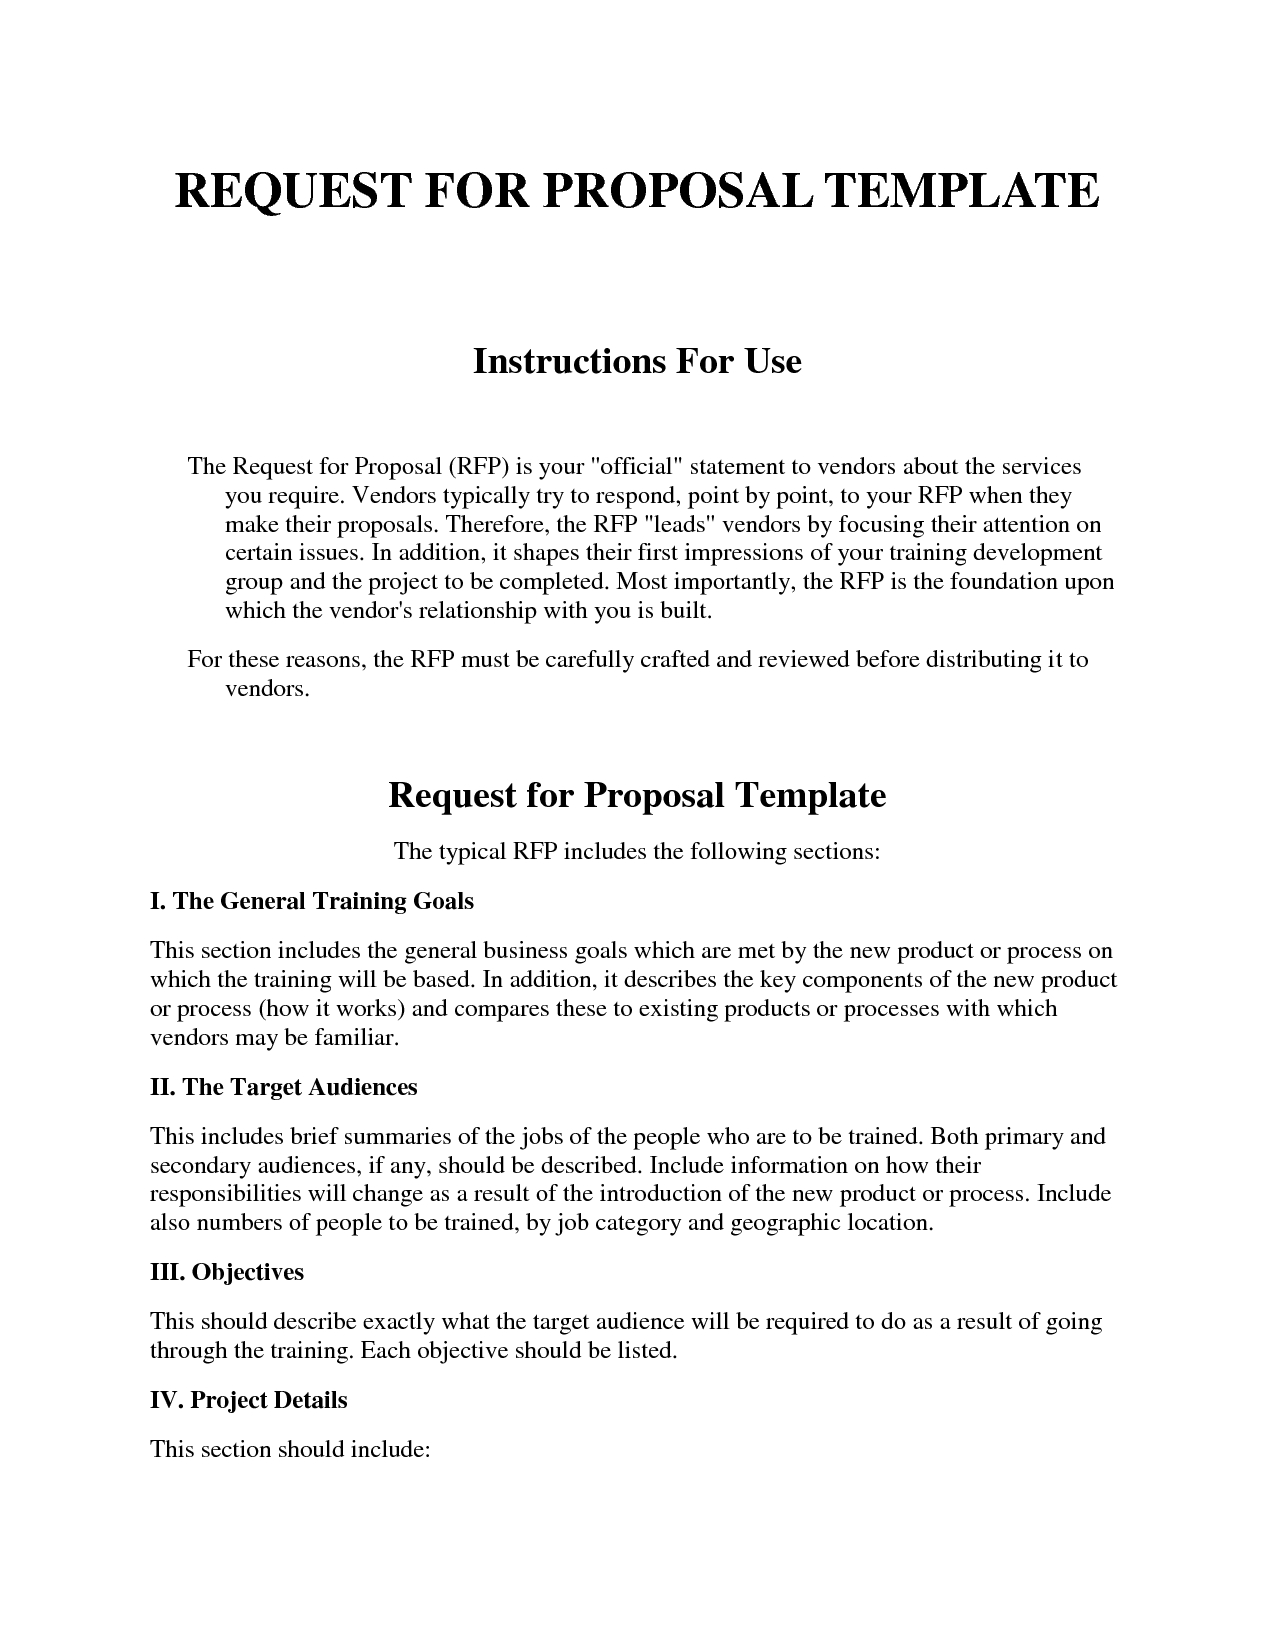 Sample Rfp Template Gallery Website Request For Proposal Template intended for size 1275 X 1650